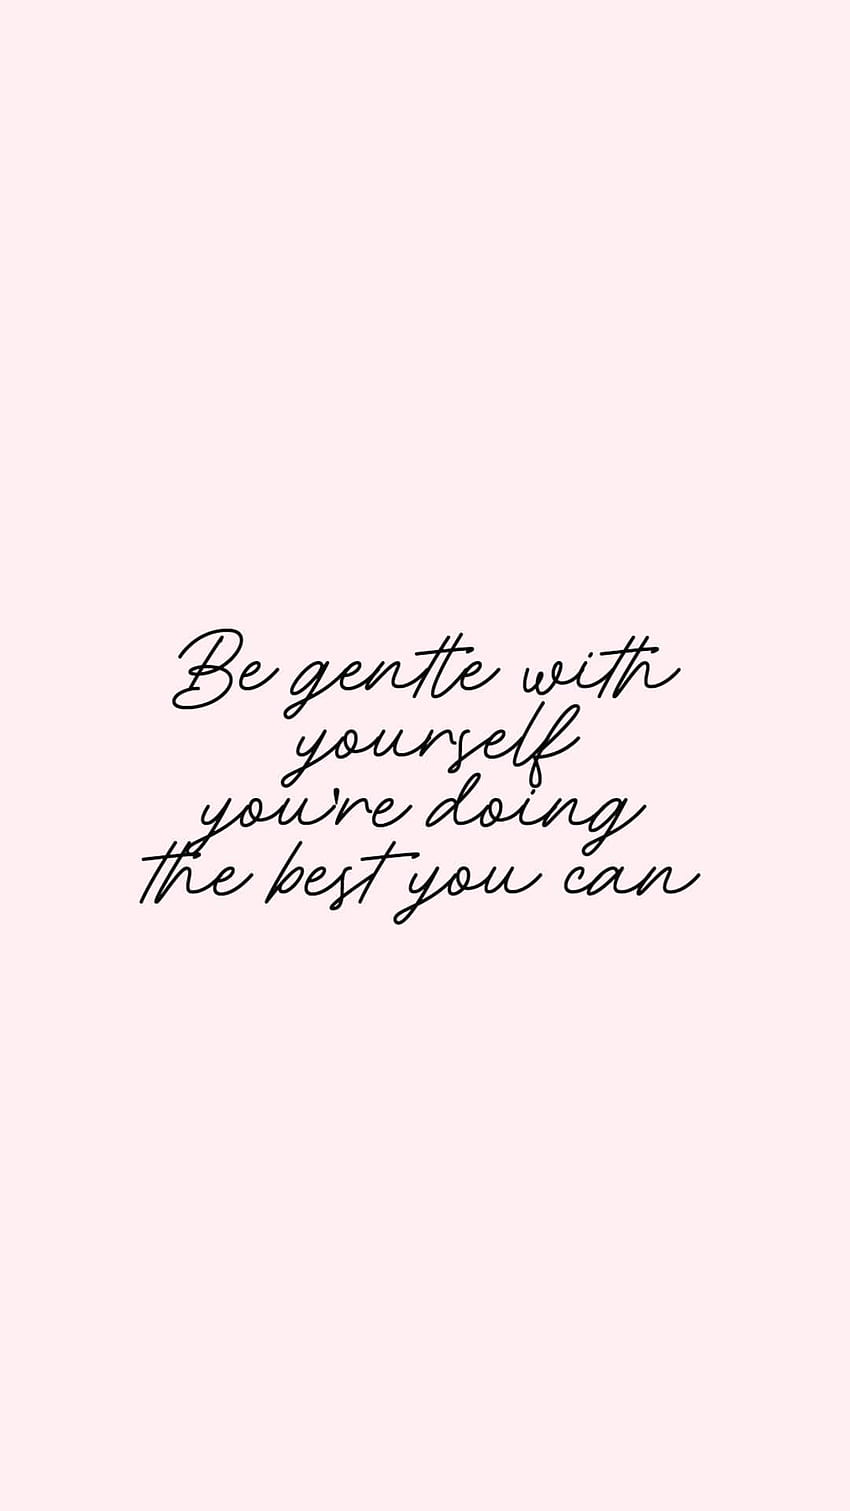 Motivation, quotes, self love ❤️. Quotes, quotes HD phone wallpaper